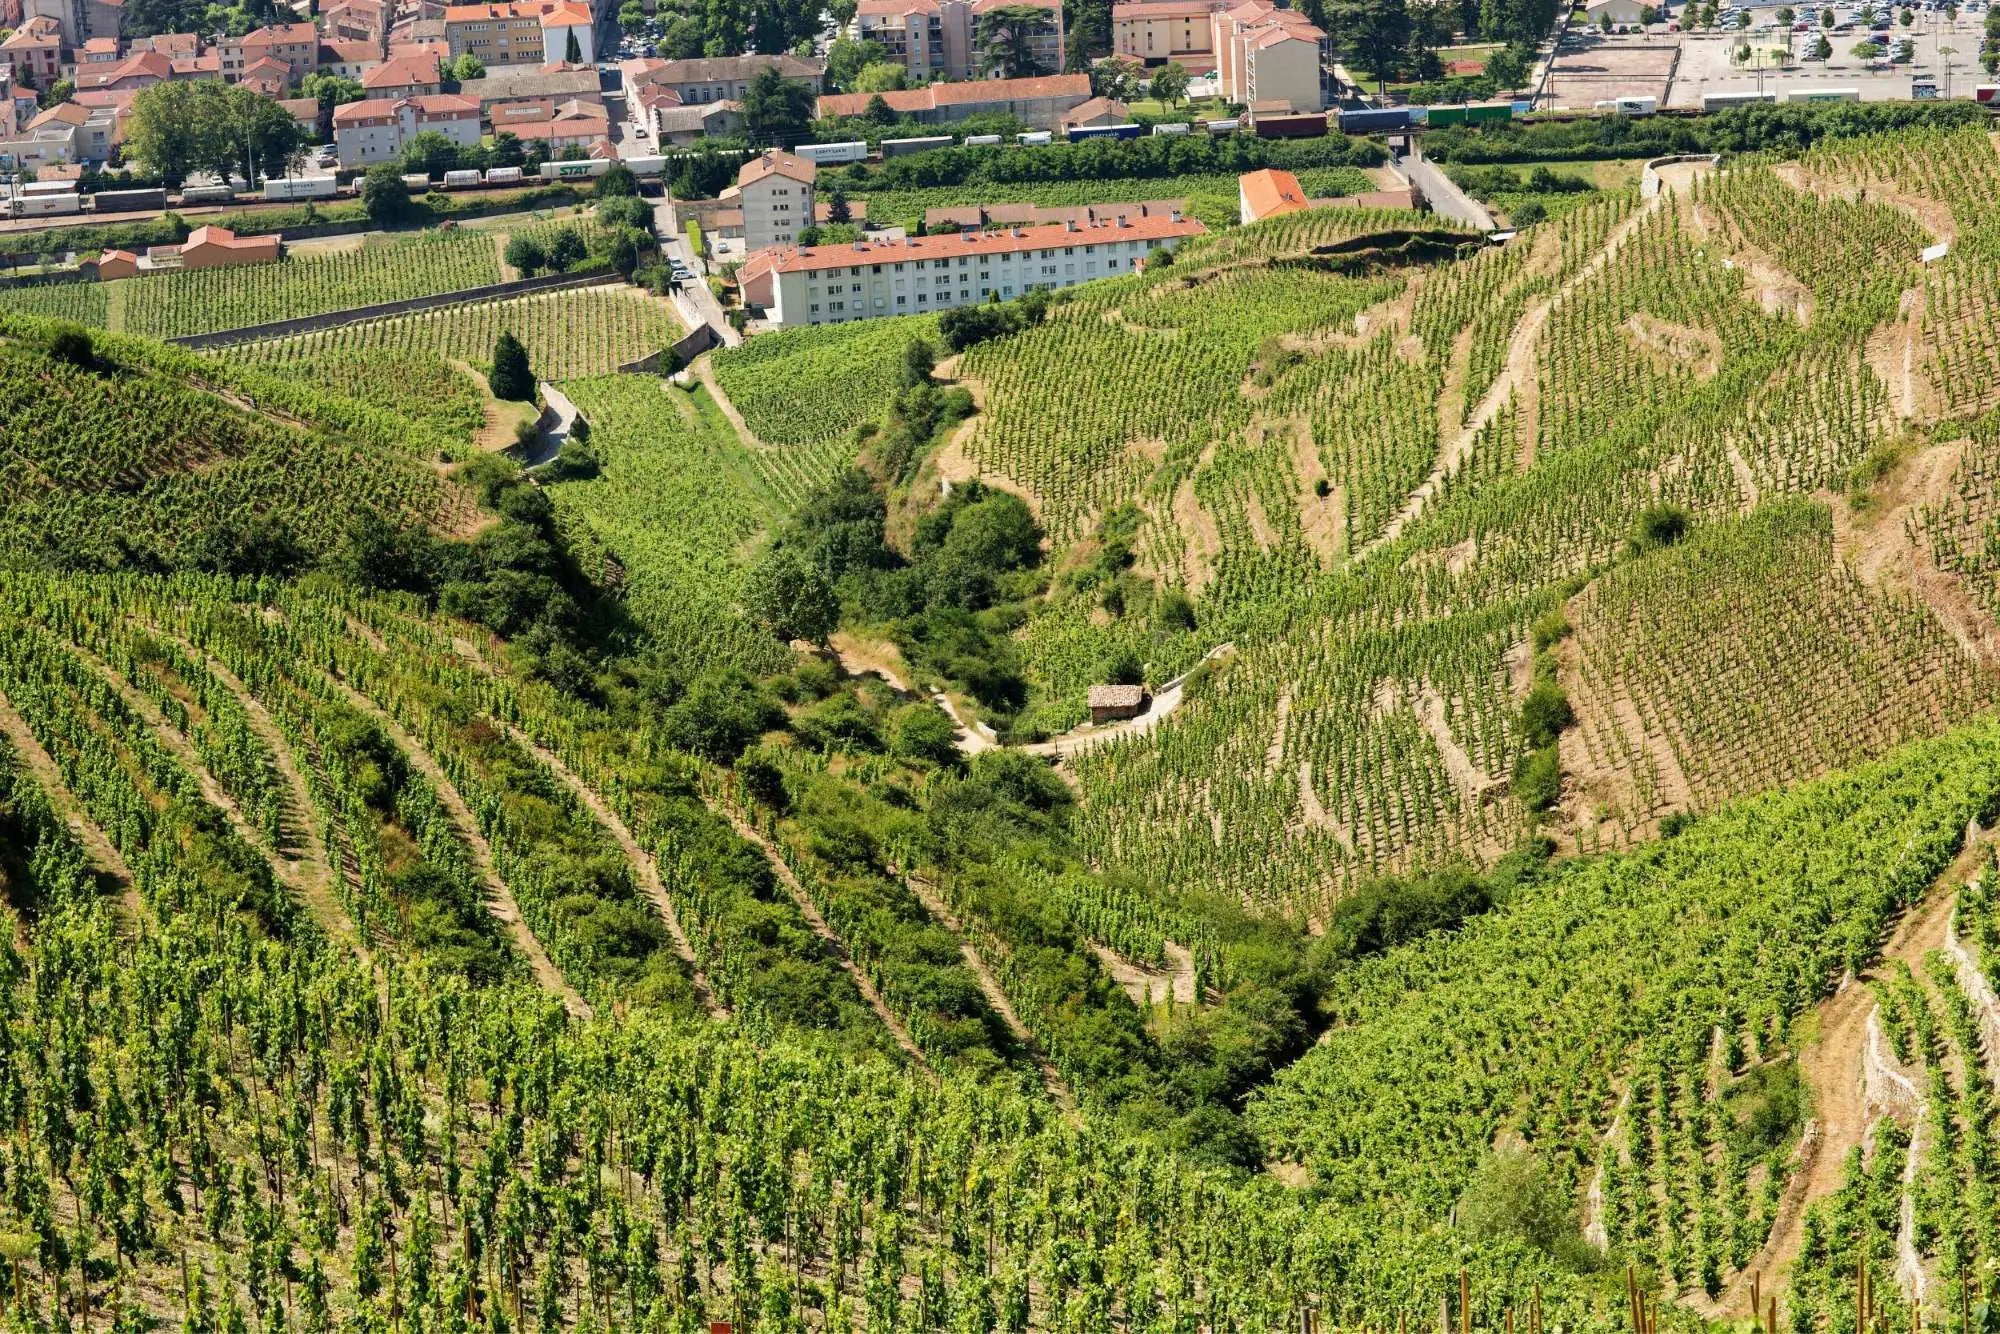 Domaine Guigal